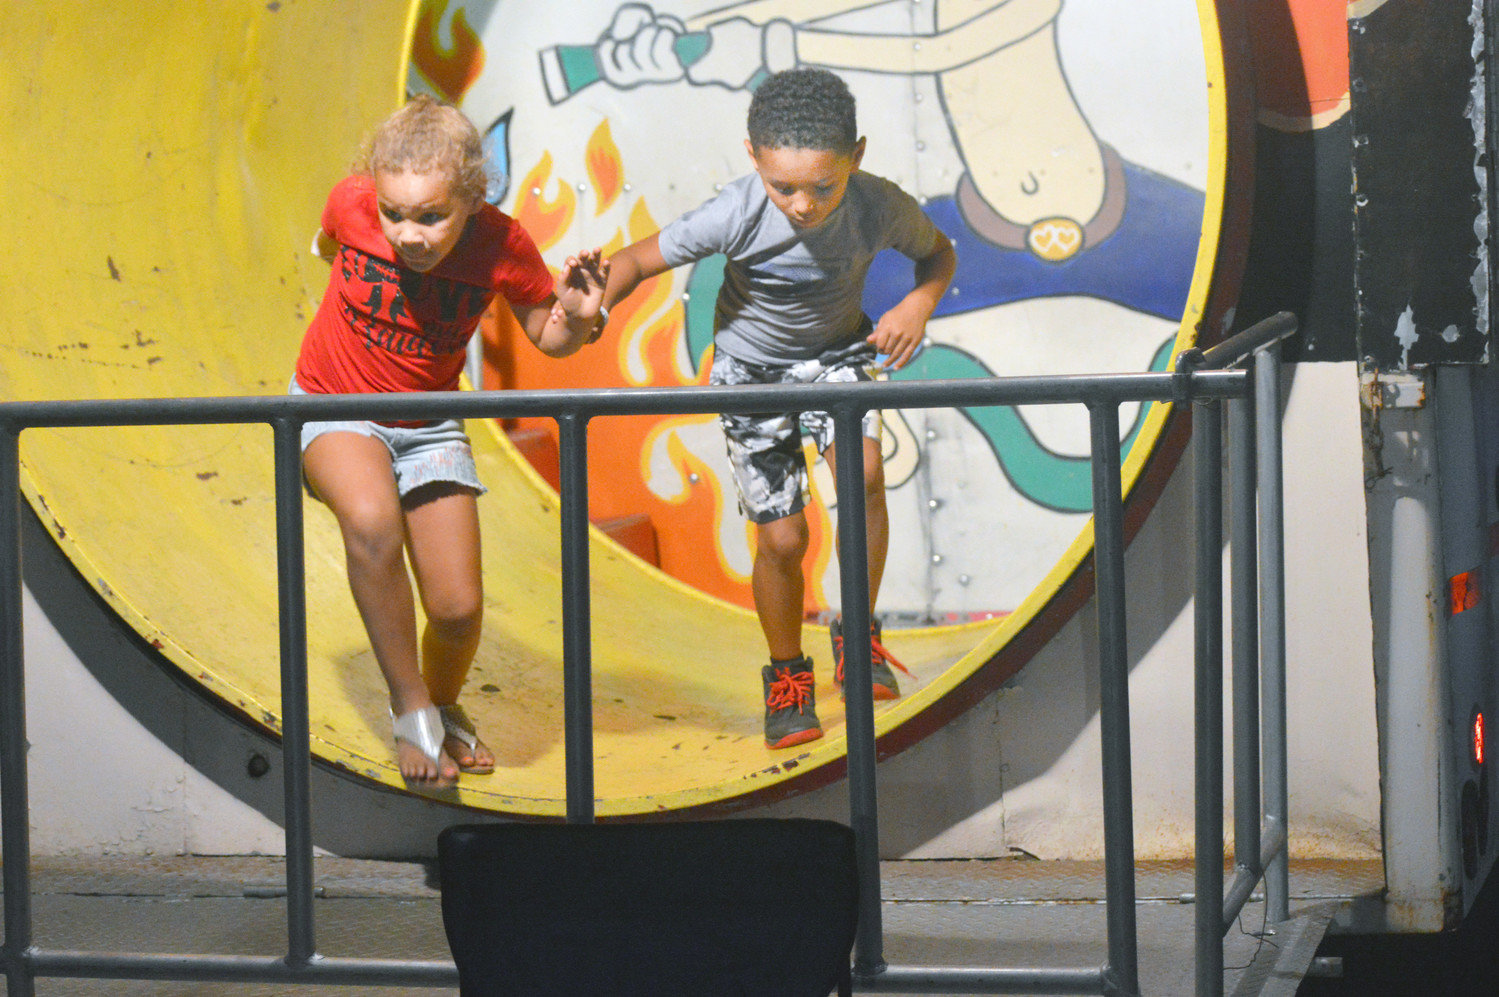 These two youngsters did their best to help each other through the tunnel at the end of the Fun House.